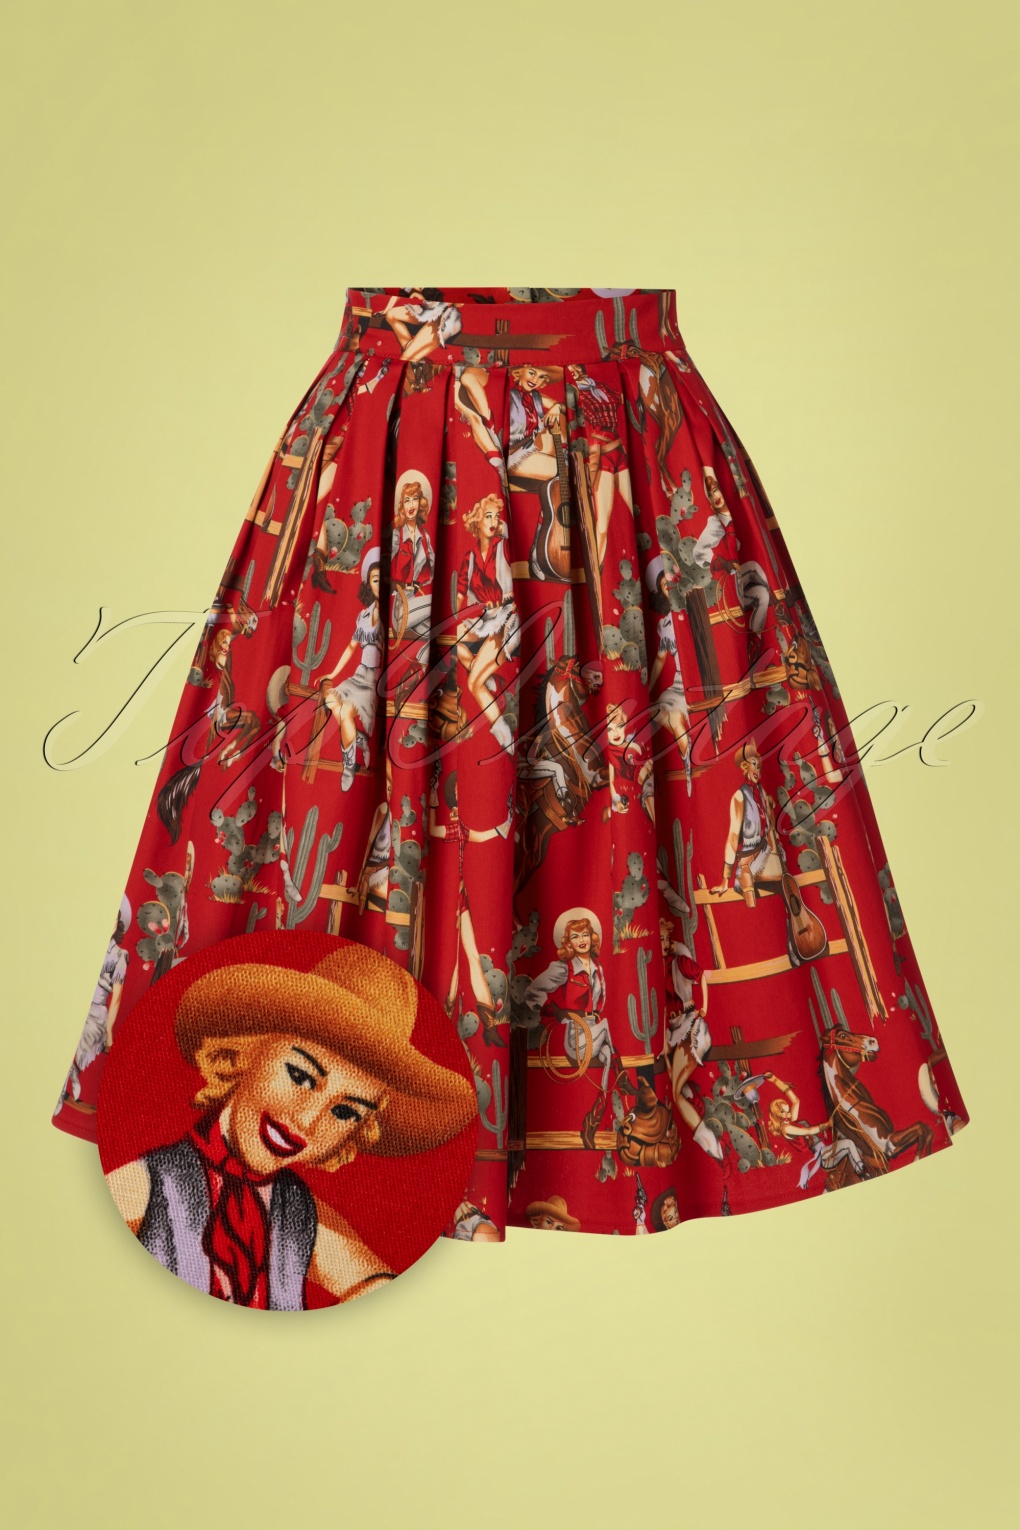 cowgirl skirts and dresses uk